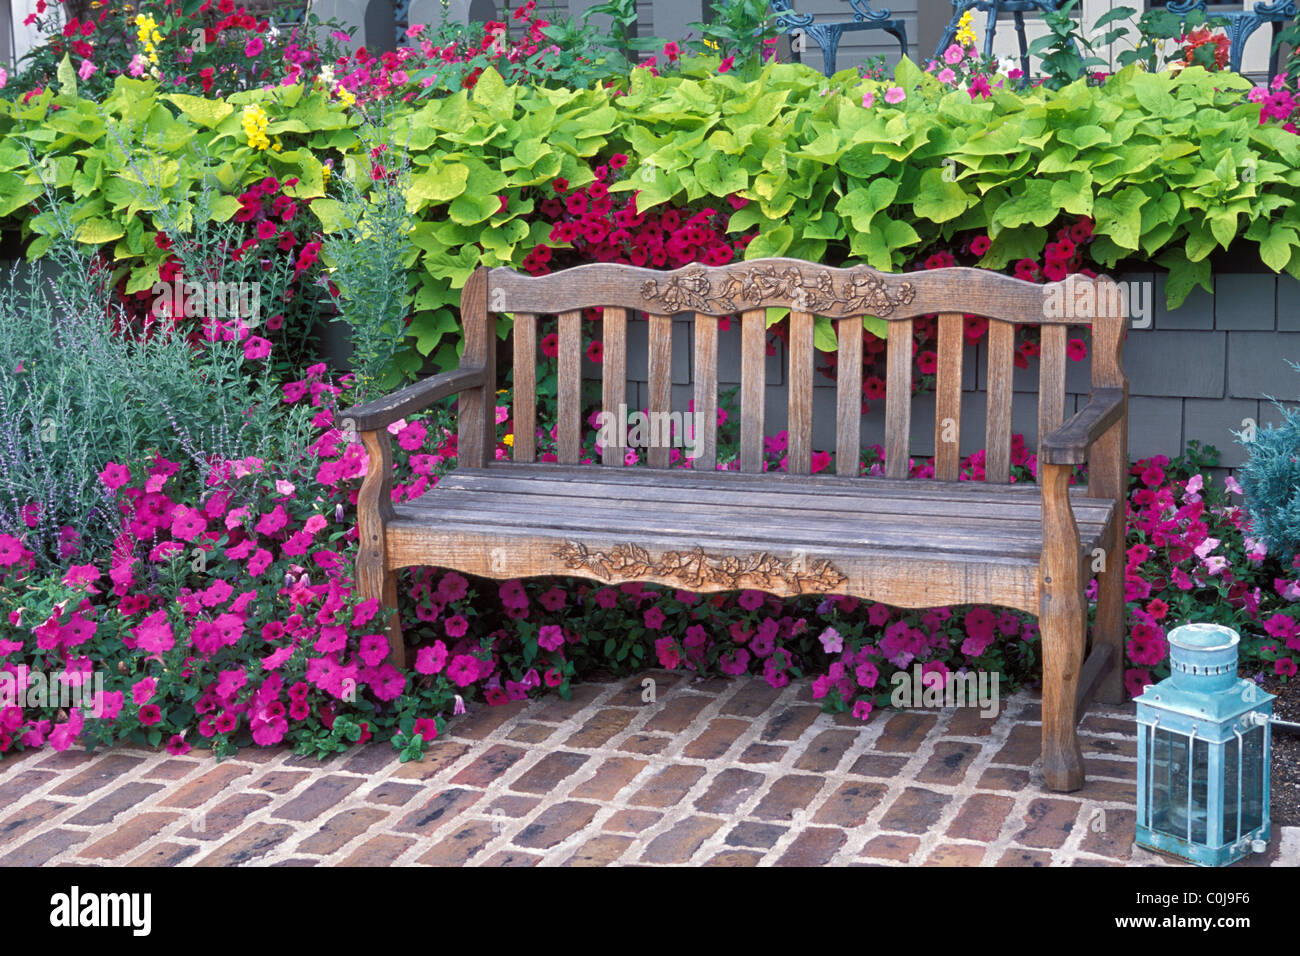 GARDEN BENCH ON BRICK PATIO BORDERED BY ORNAMENTAL SWEET POTATO VINE, RUSSIAN SAGE AND PETUNIAS.  CANDLE LANTERN IN CORNER. Stock Photo